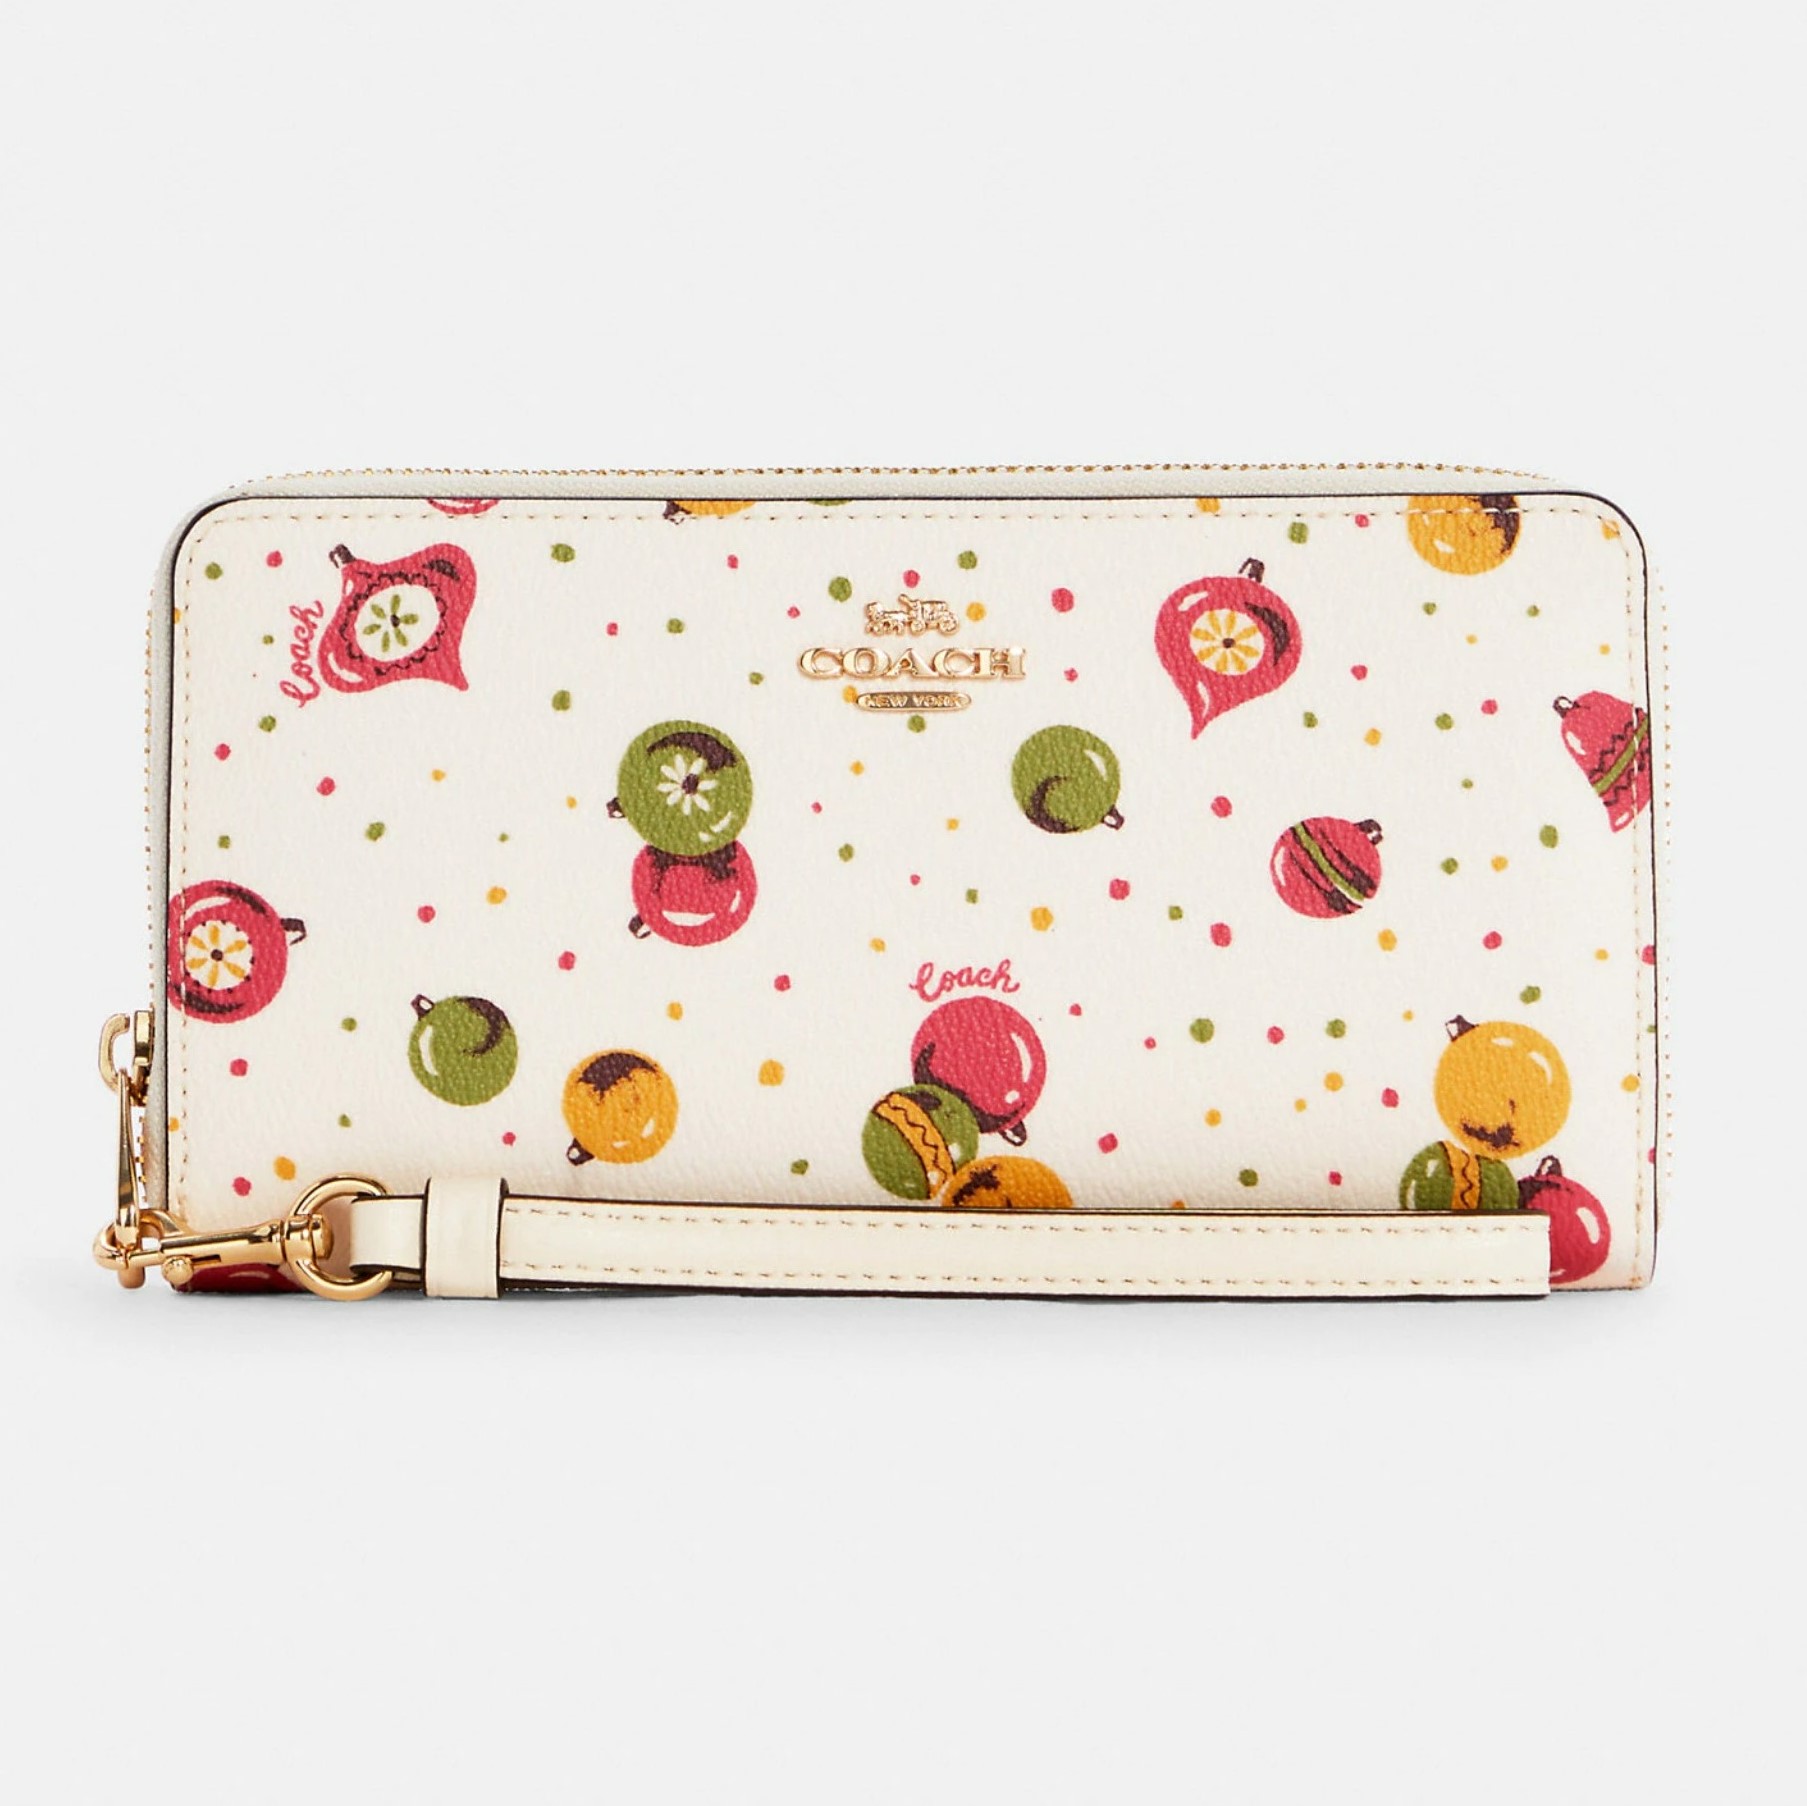 VÍ COACH DÀI HỌA TIẾT MỚI LONG ZIP AROUND WALLET IN SIGNATURE CANVAS WITH ORNAMENT PRINT 1